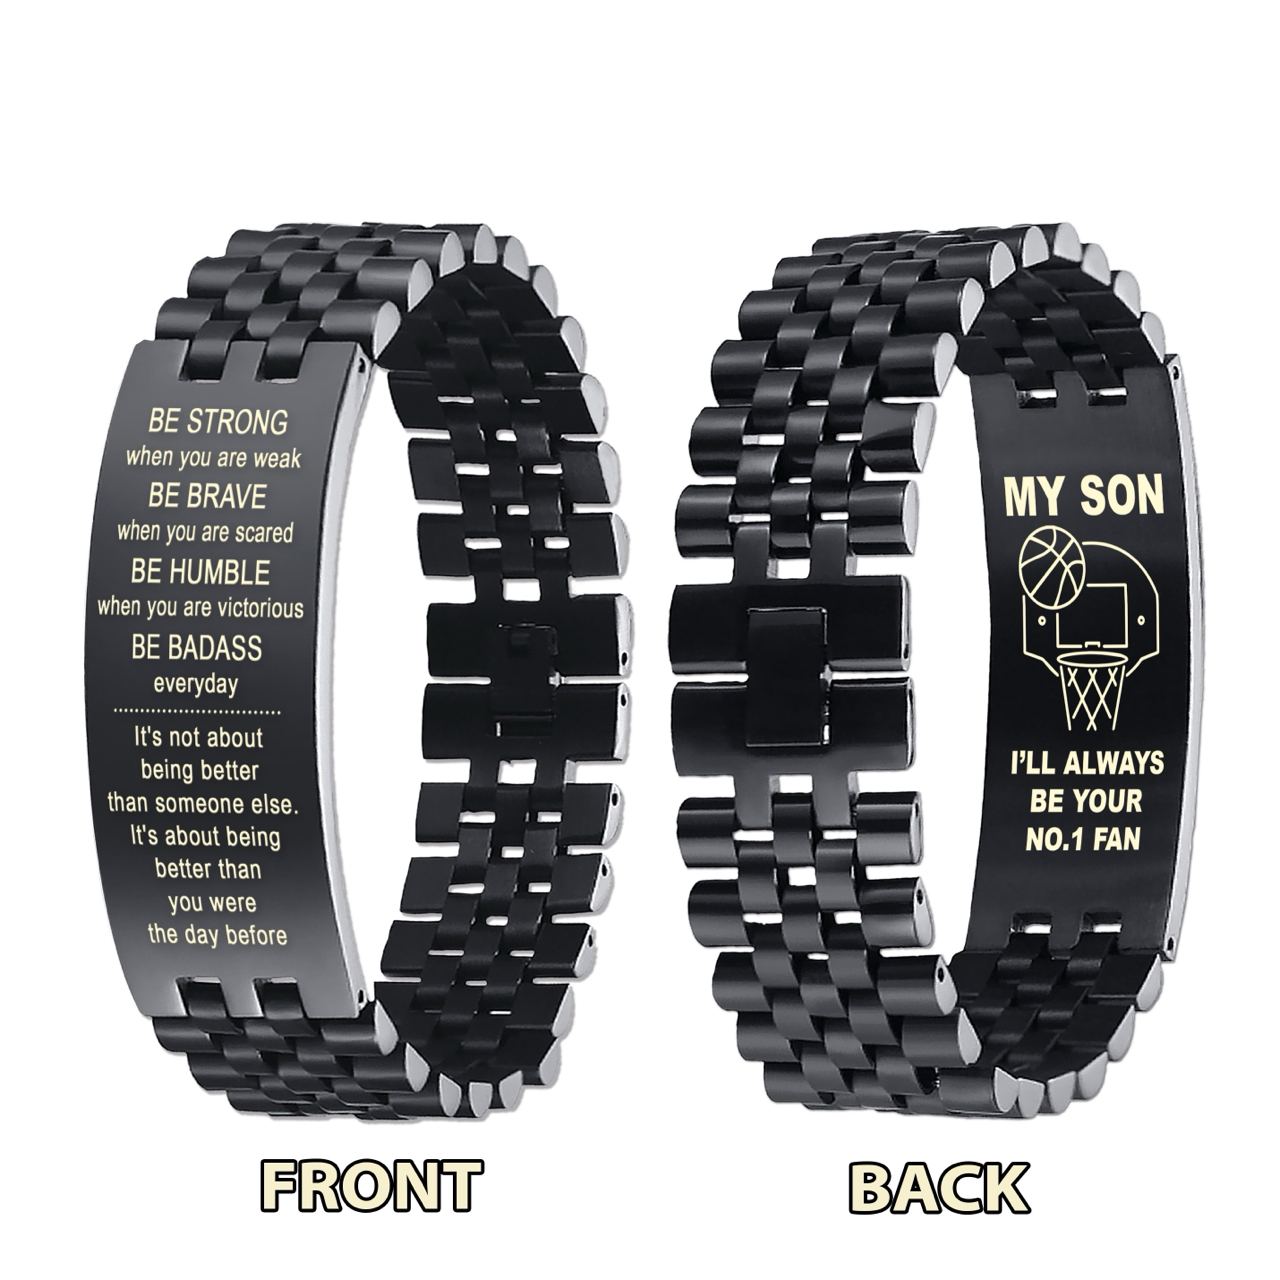 DS1-Customizable basketball bracelet, gifts from dad mom to son- I hope you believe in yourself